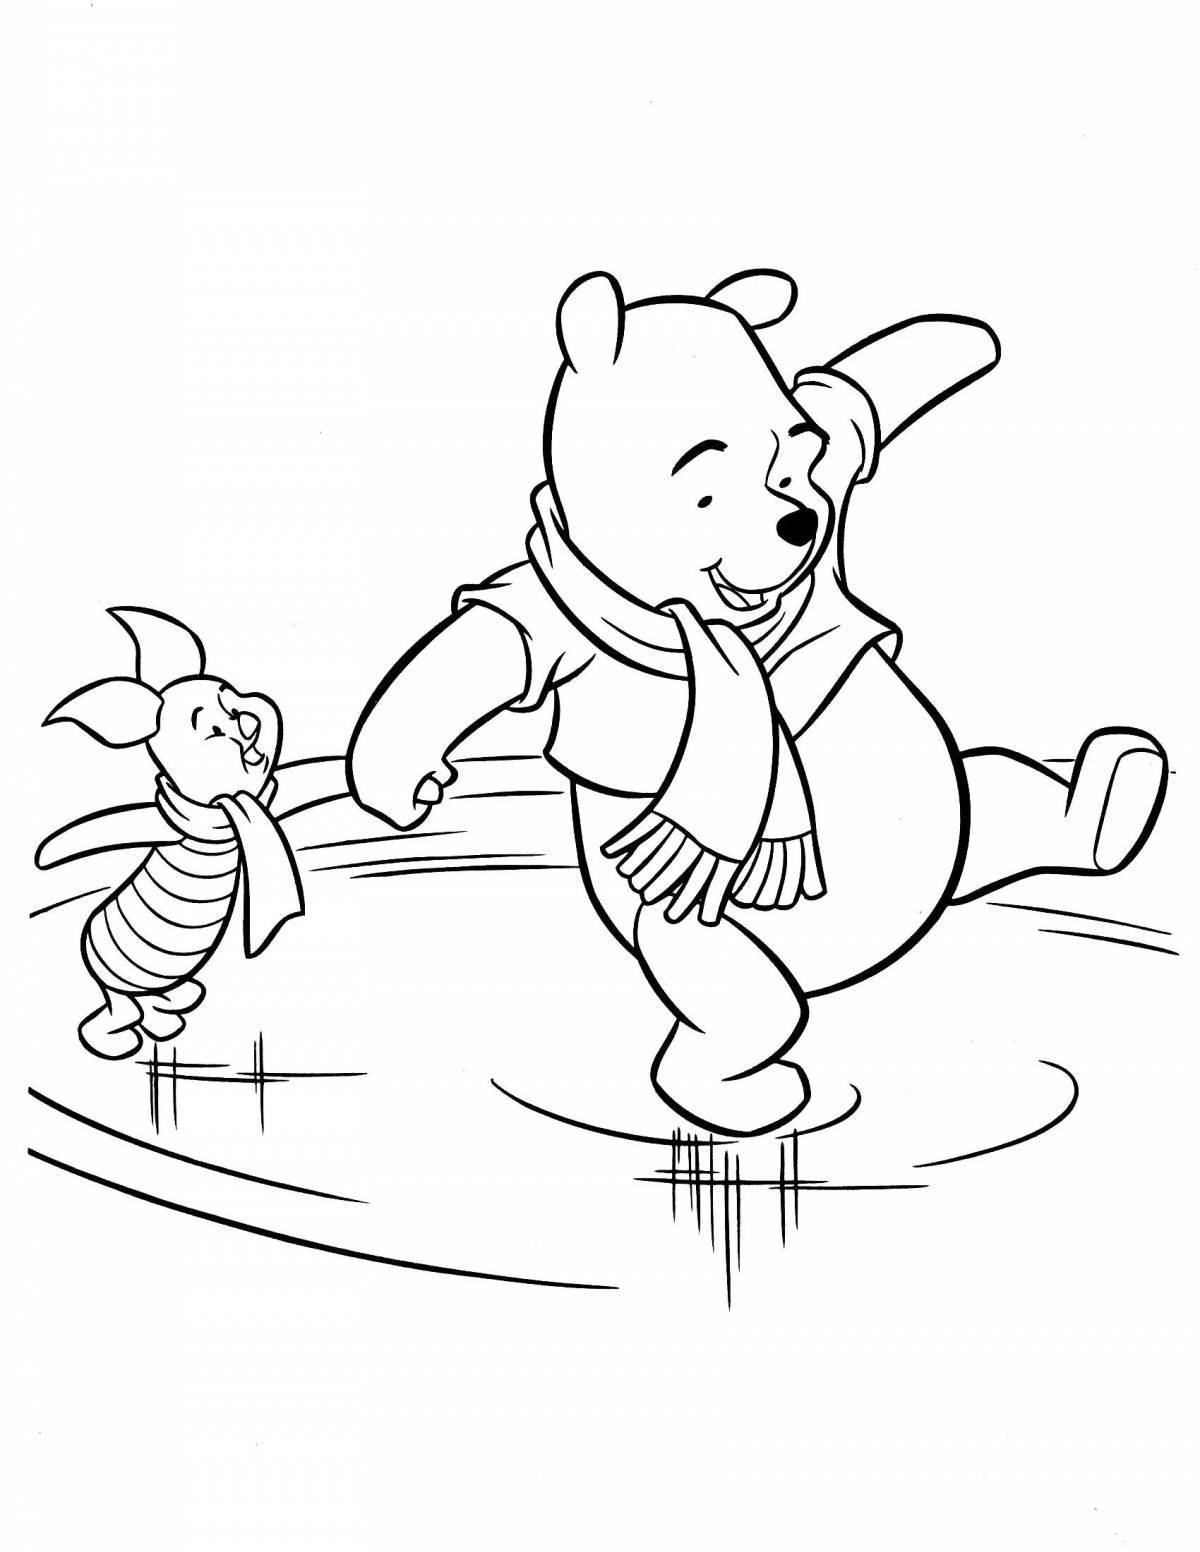 Winnie the Pooh fun coloring book for kids